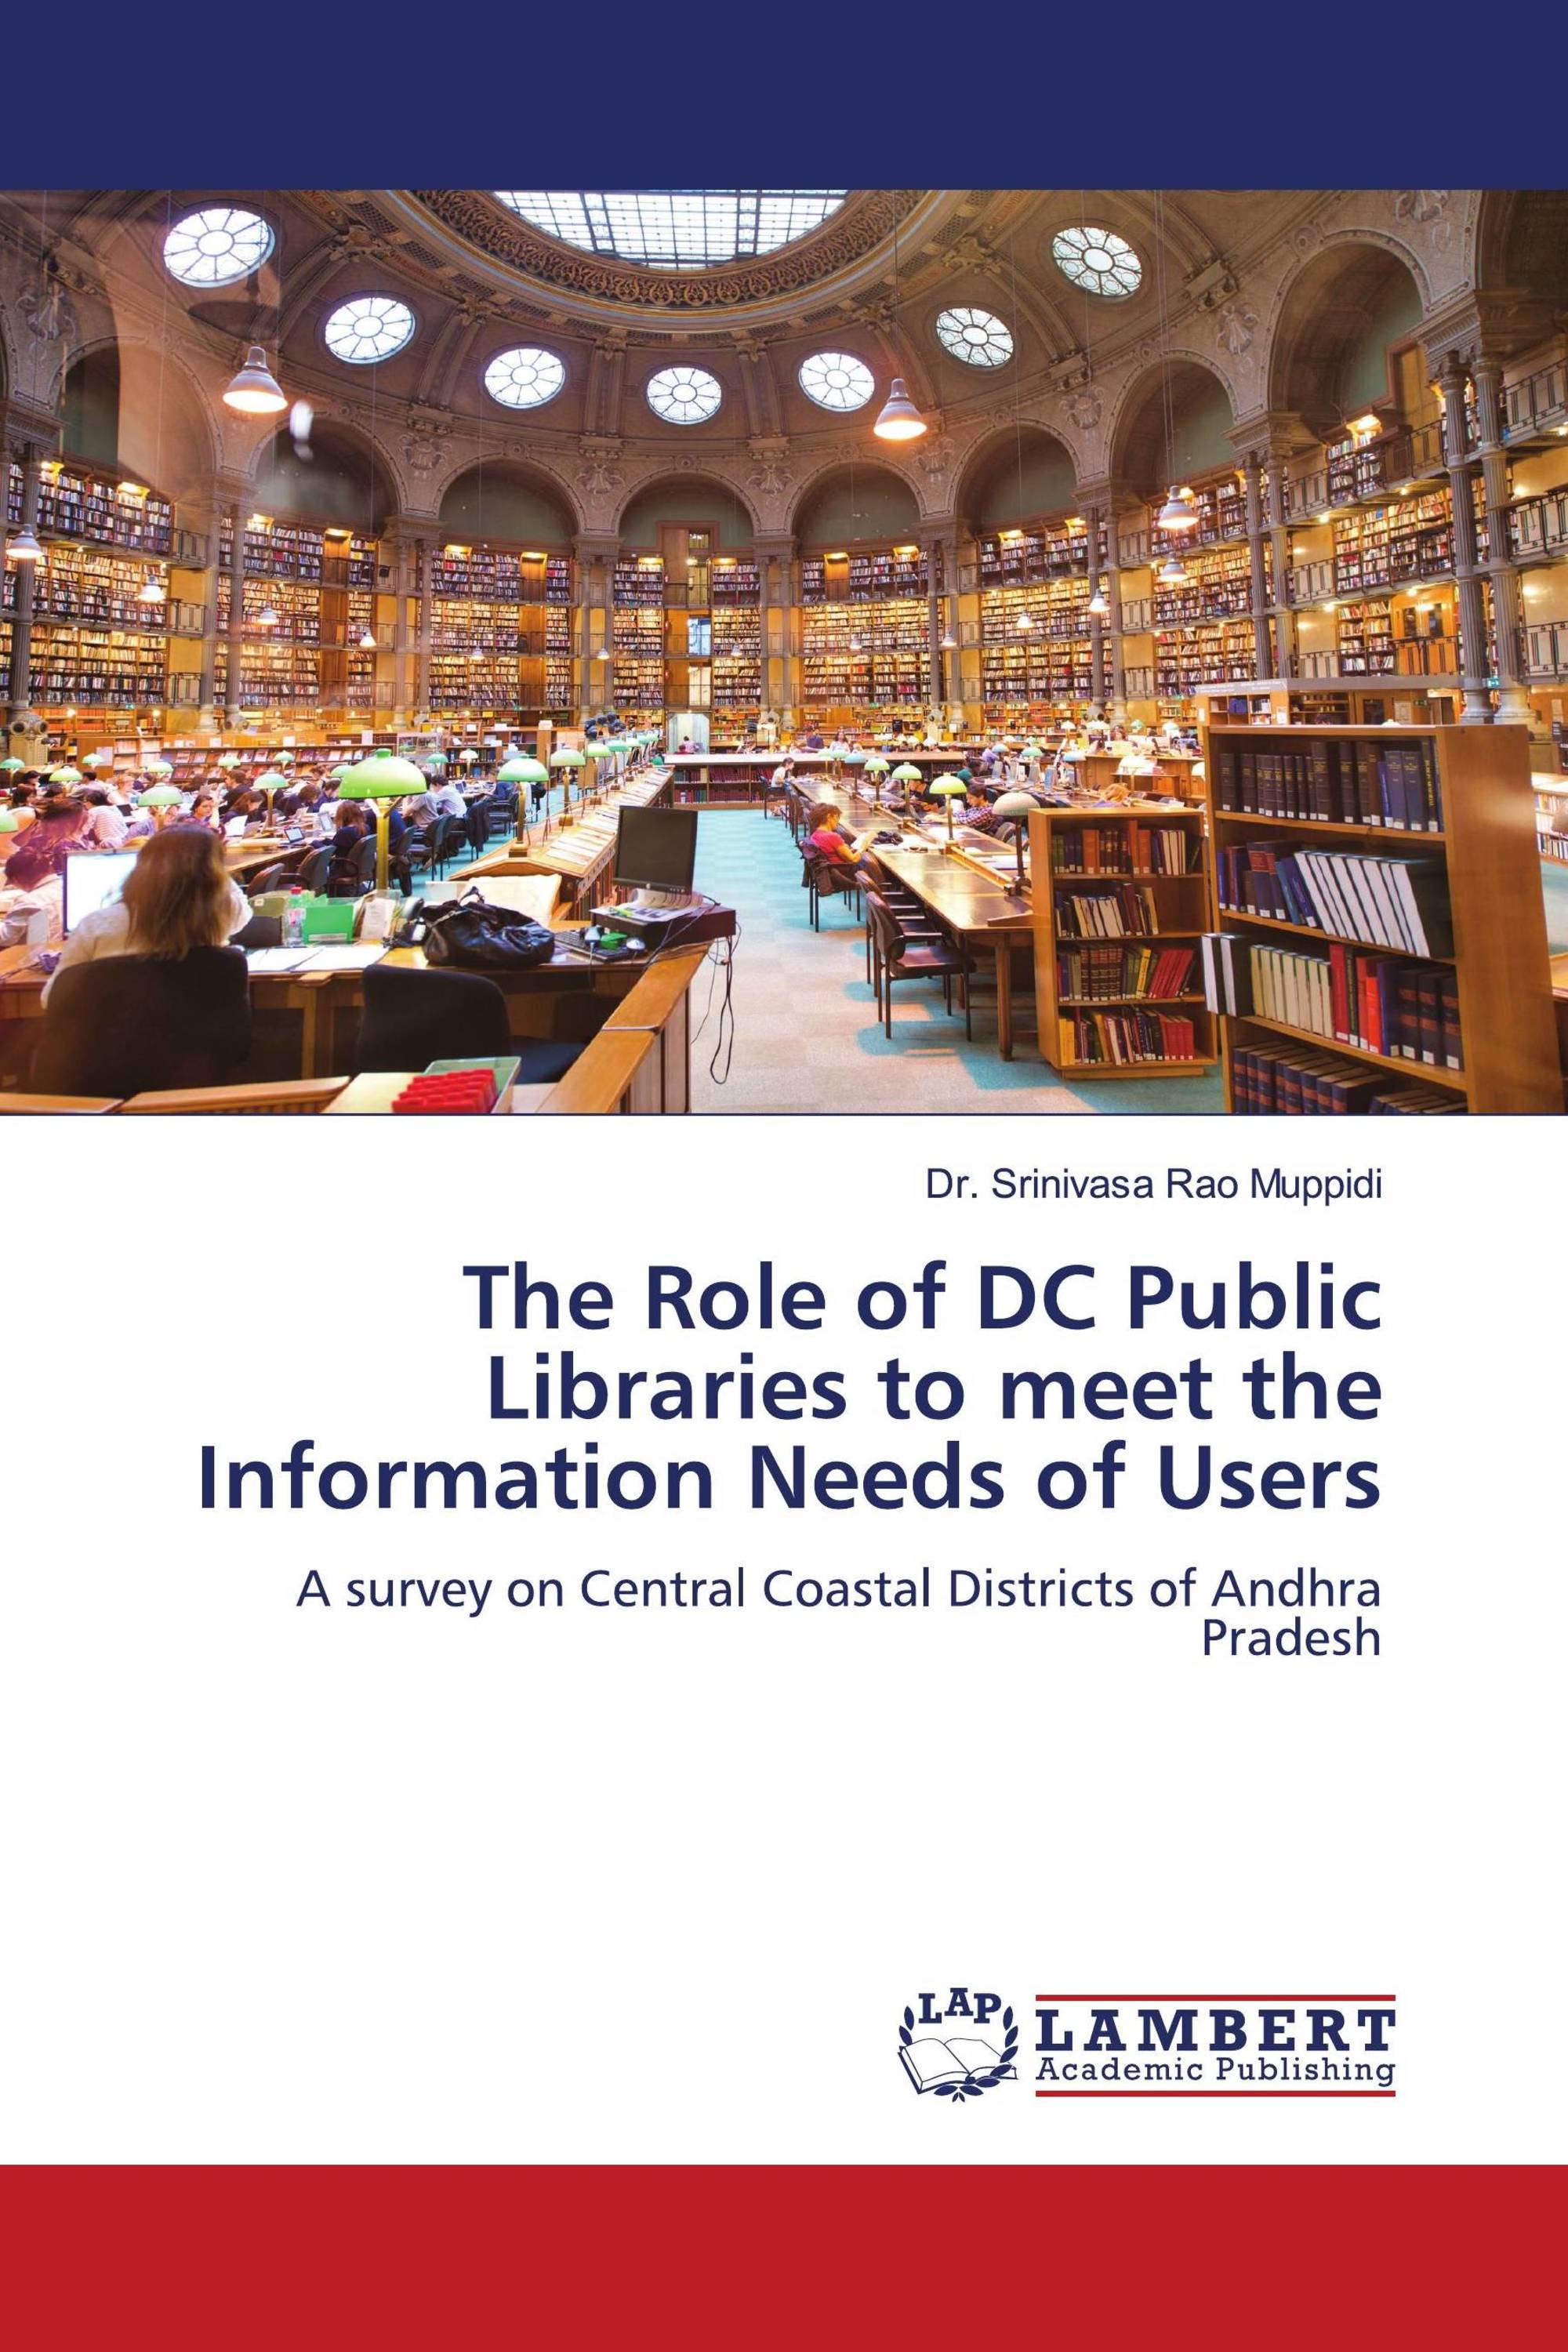 The Role of DC Public Libraries to meet the Information Needs of Users